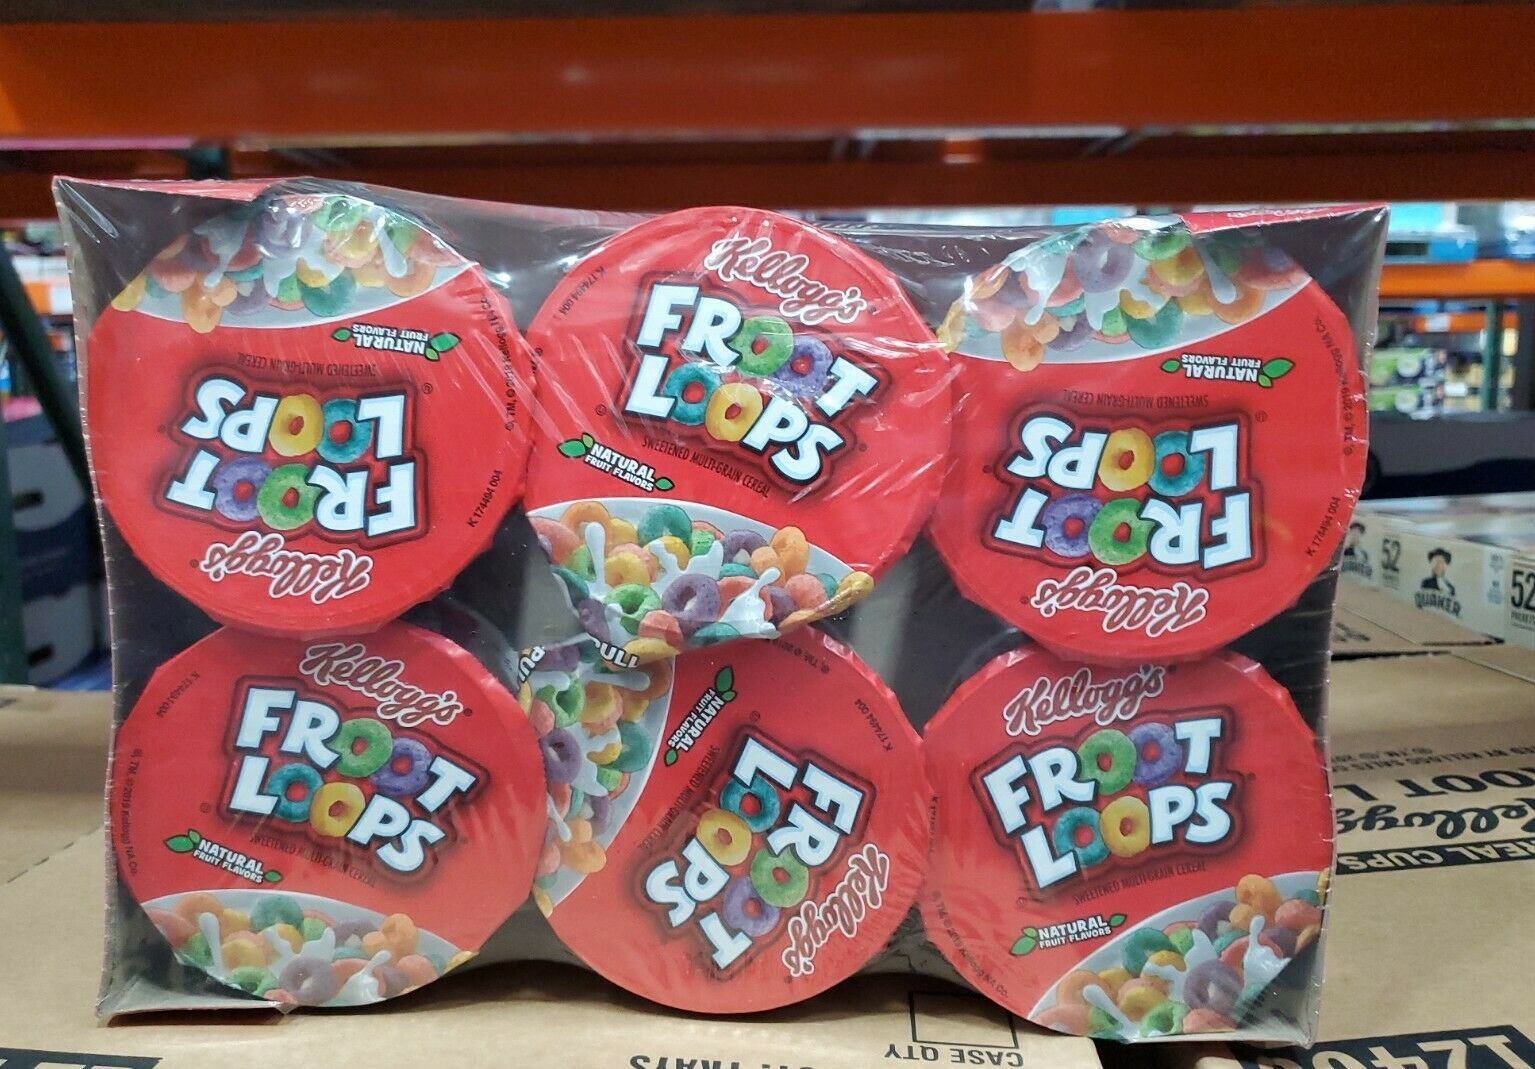 Primary image for Kellogg's Froot Loops Breakfast Cereal, Single-Serve 1.5Oz Cup, 6 Cups/Box